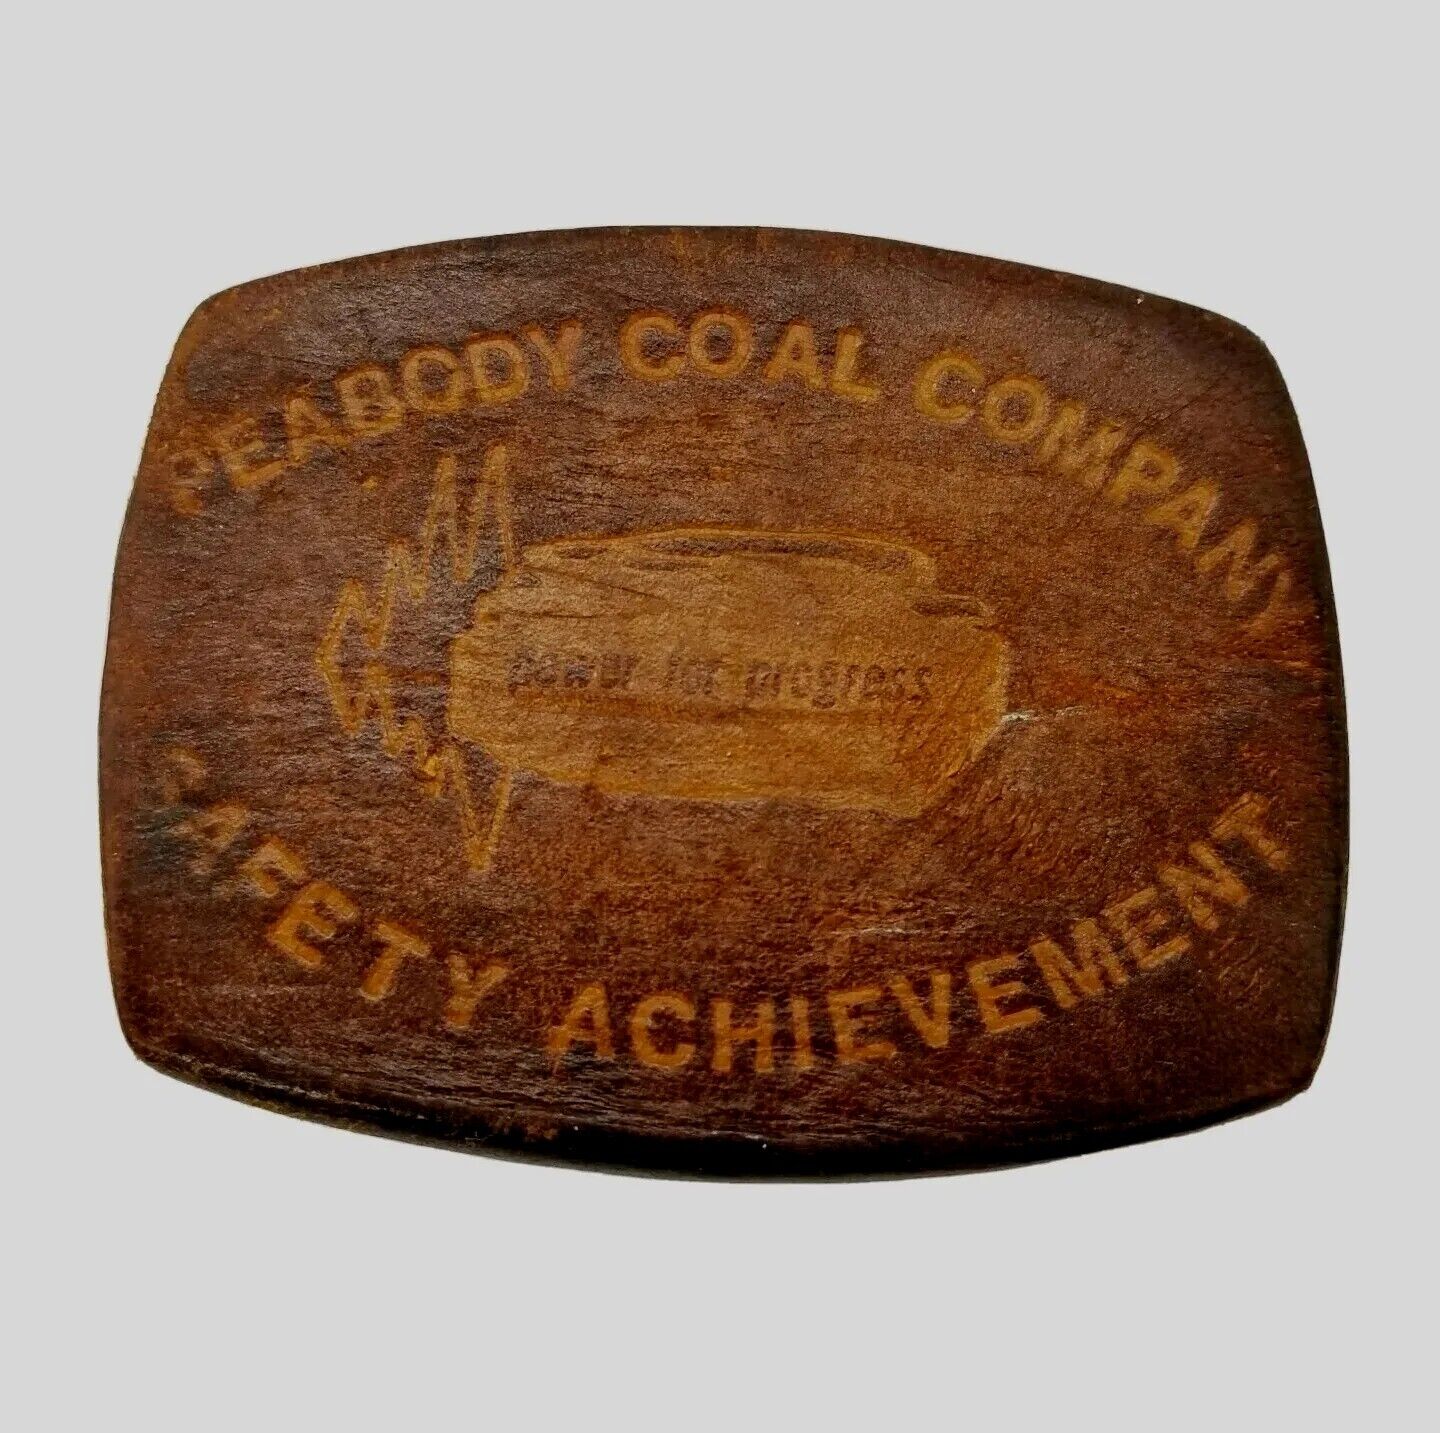 Vintage Peabody Coal Company Belt Buckle Safety Achievement Leather + Metal RARE